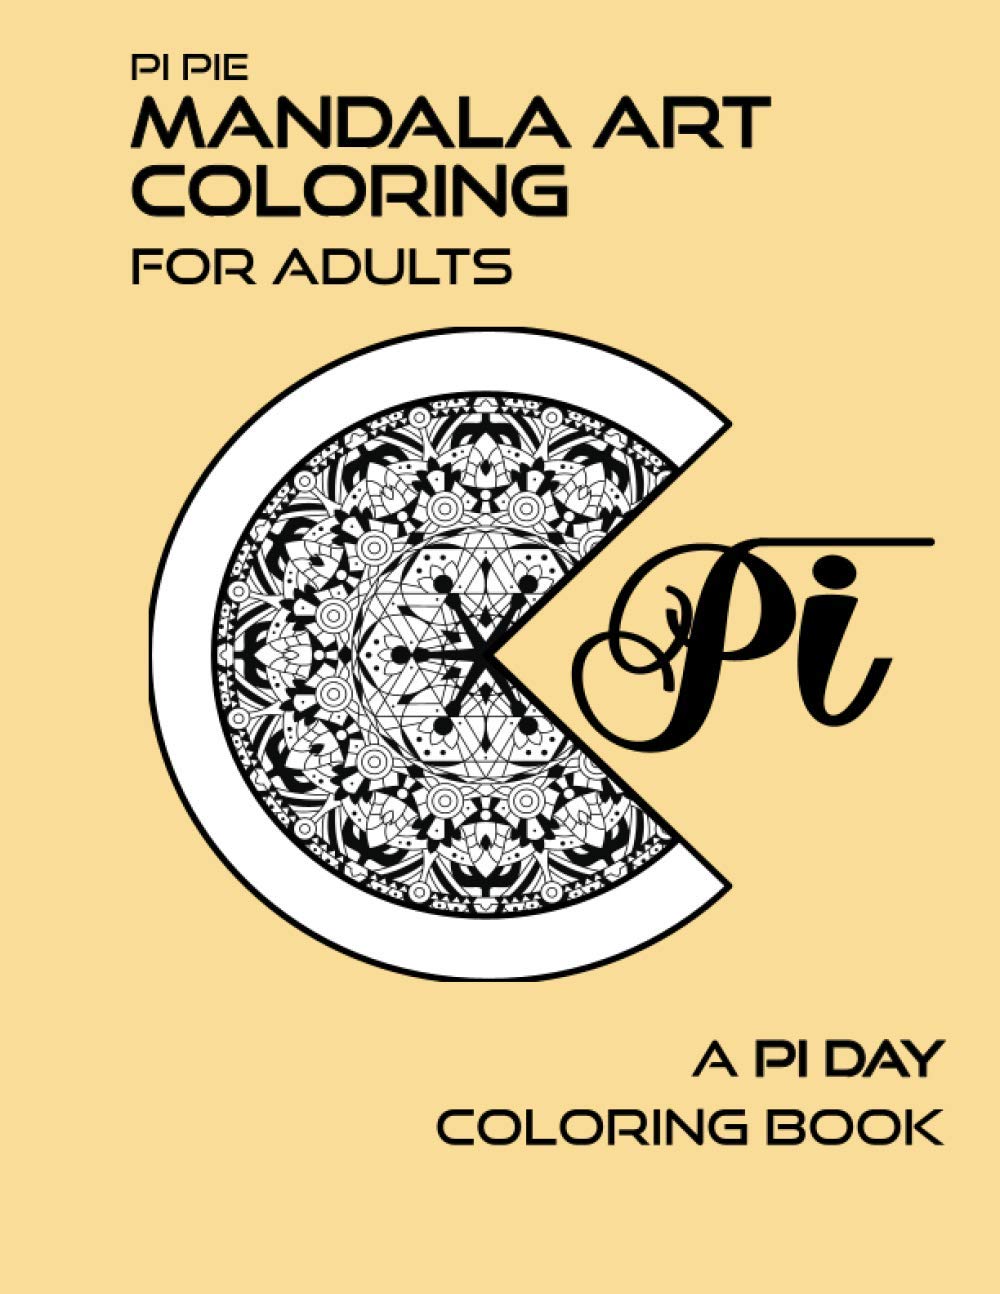 Pi pie mandala art coloring for adults a pi day coloring book by holiday helper